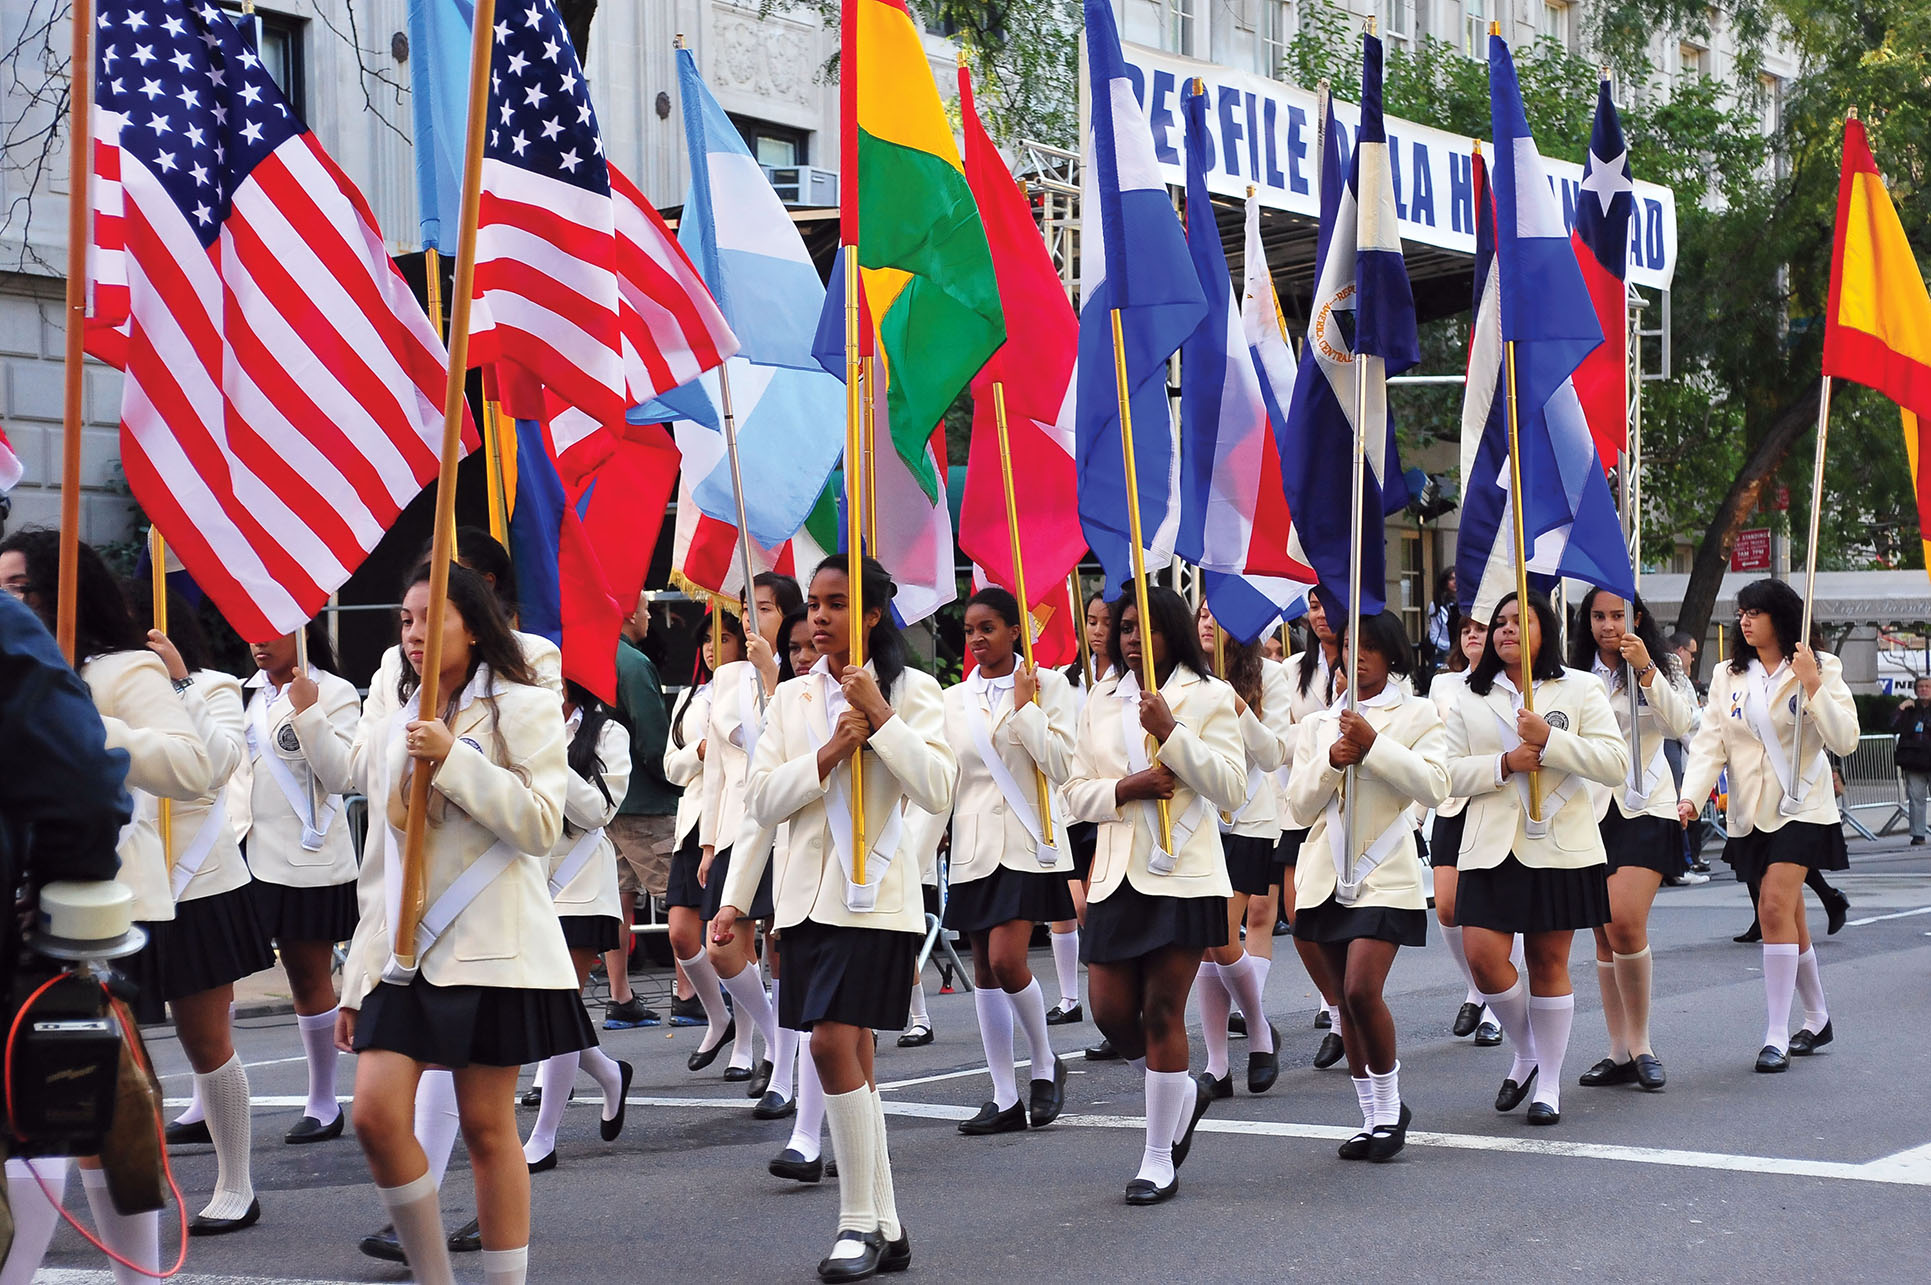 A group of young women carrying Latin American flags march in the Hispanic Day Parade, Fifth Avenue, New York, 2010. (Photo by Asterio Iecson.)